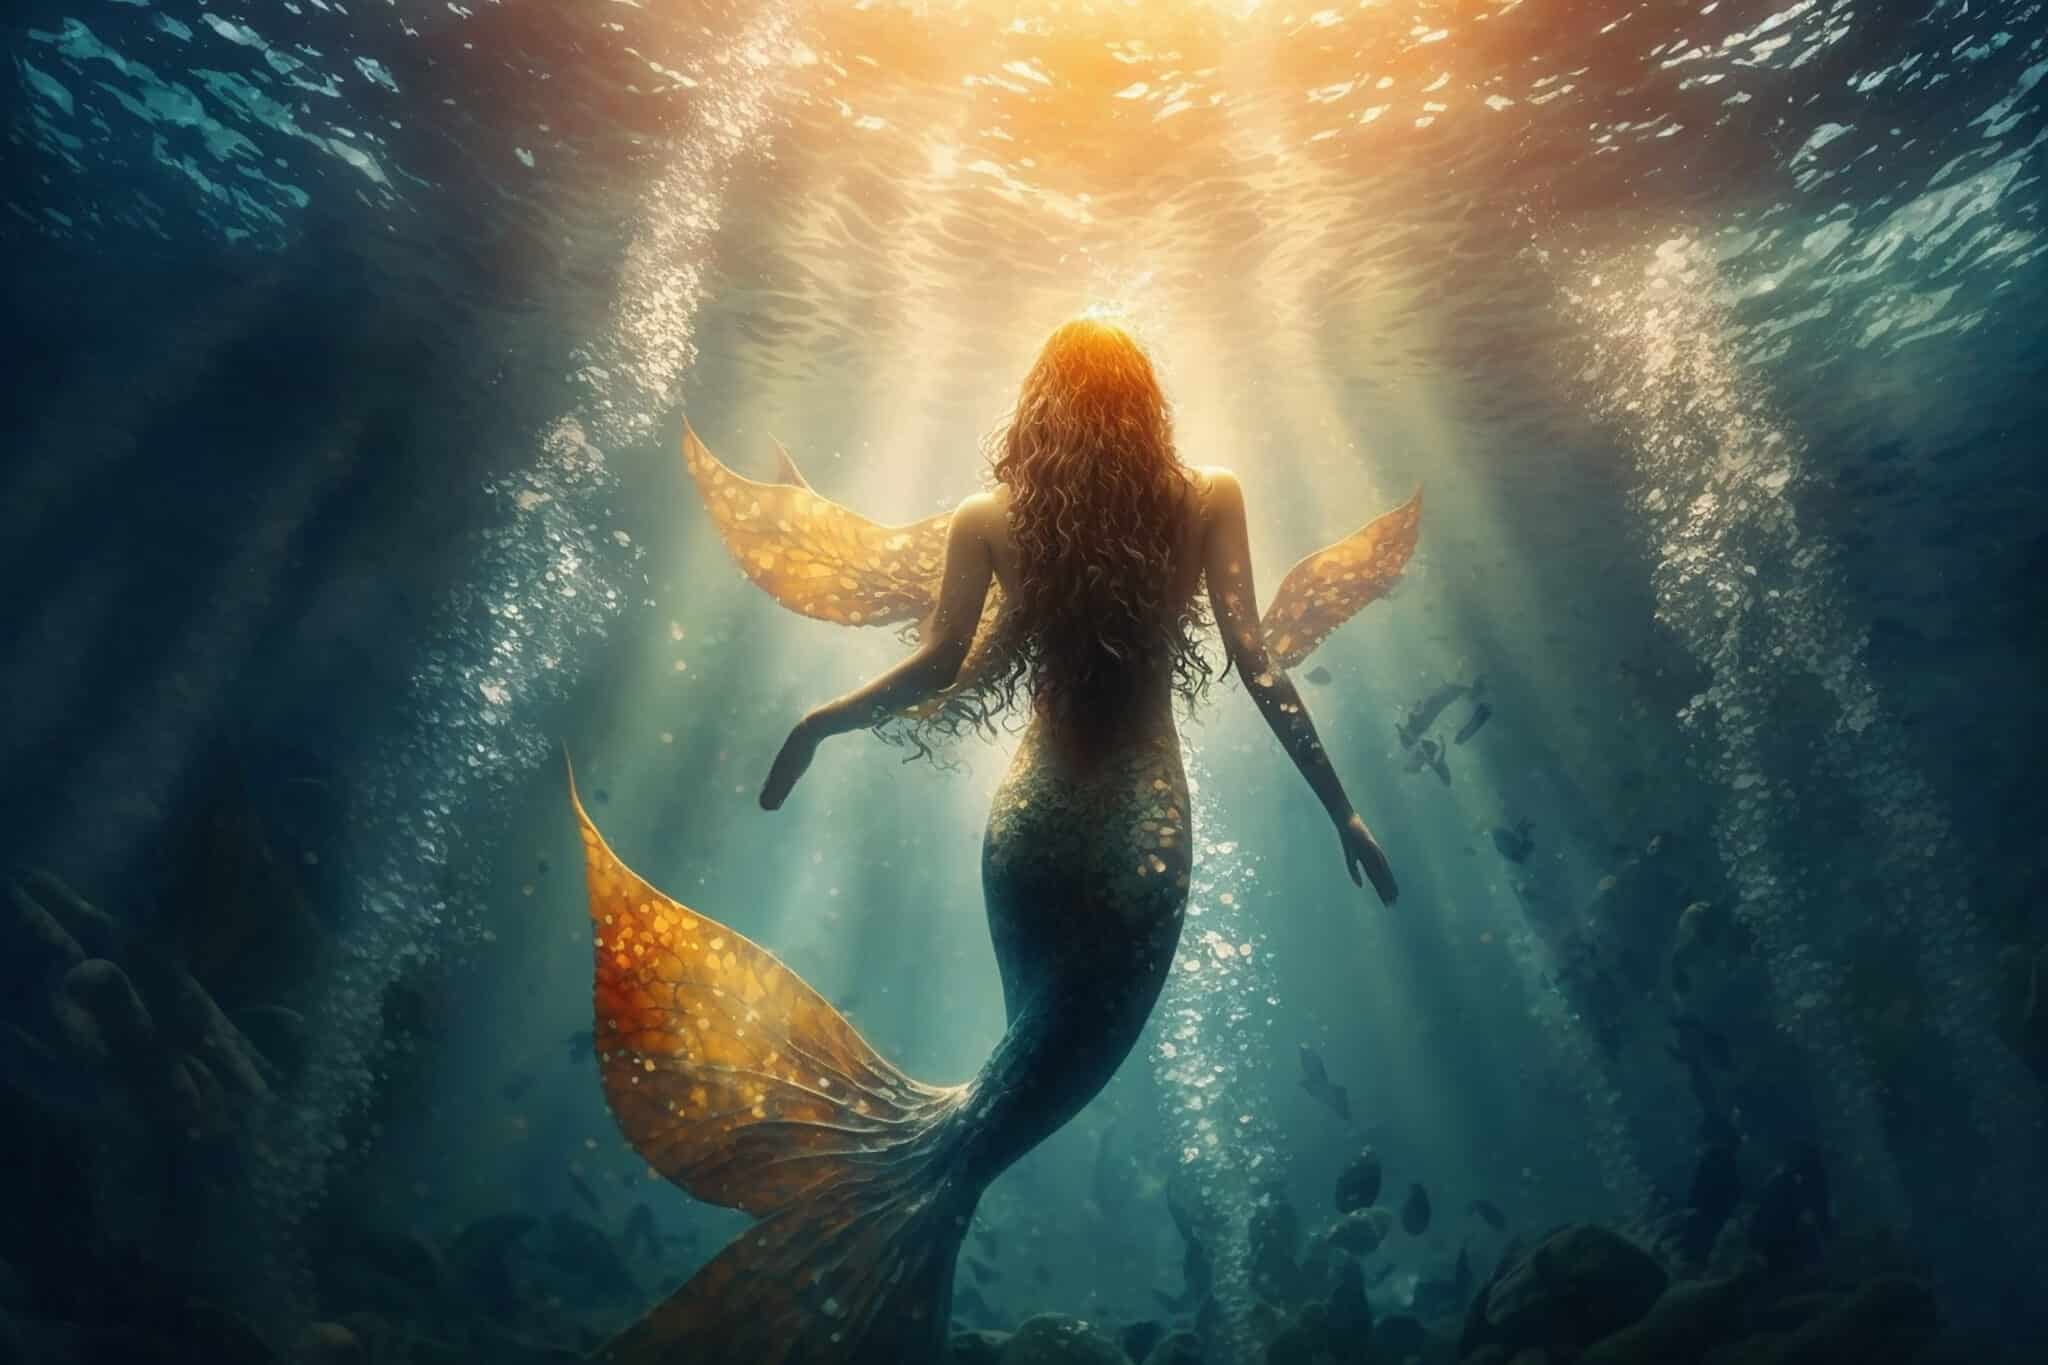 golden tailed mermaid under the water head looking above the sunlit water surface